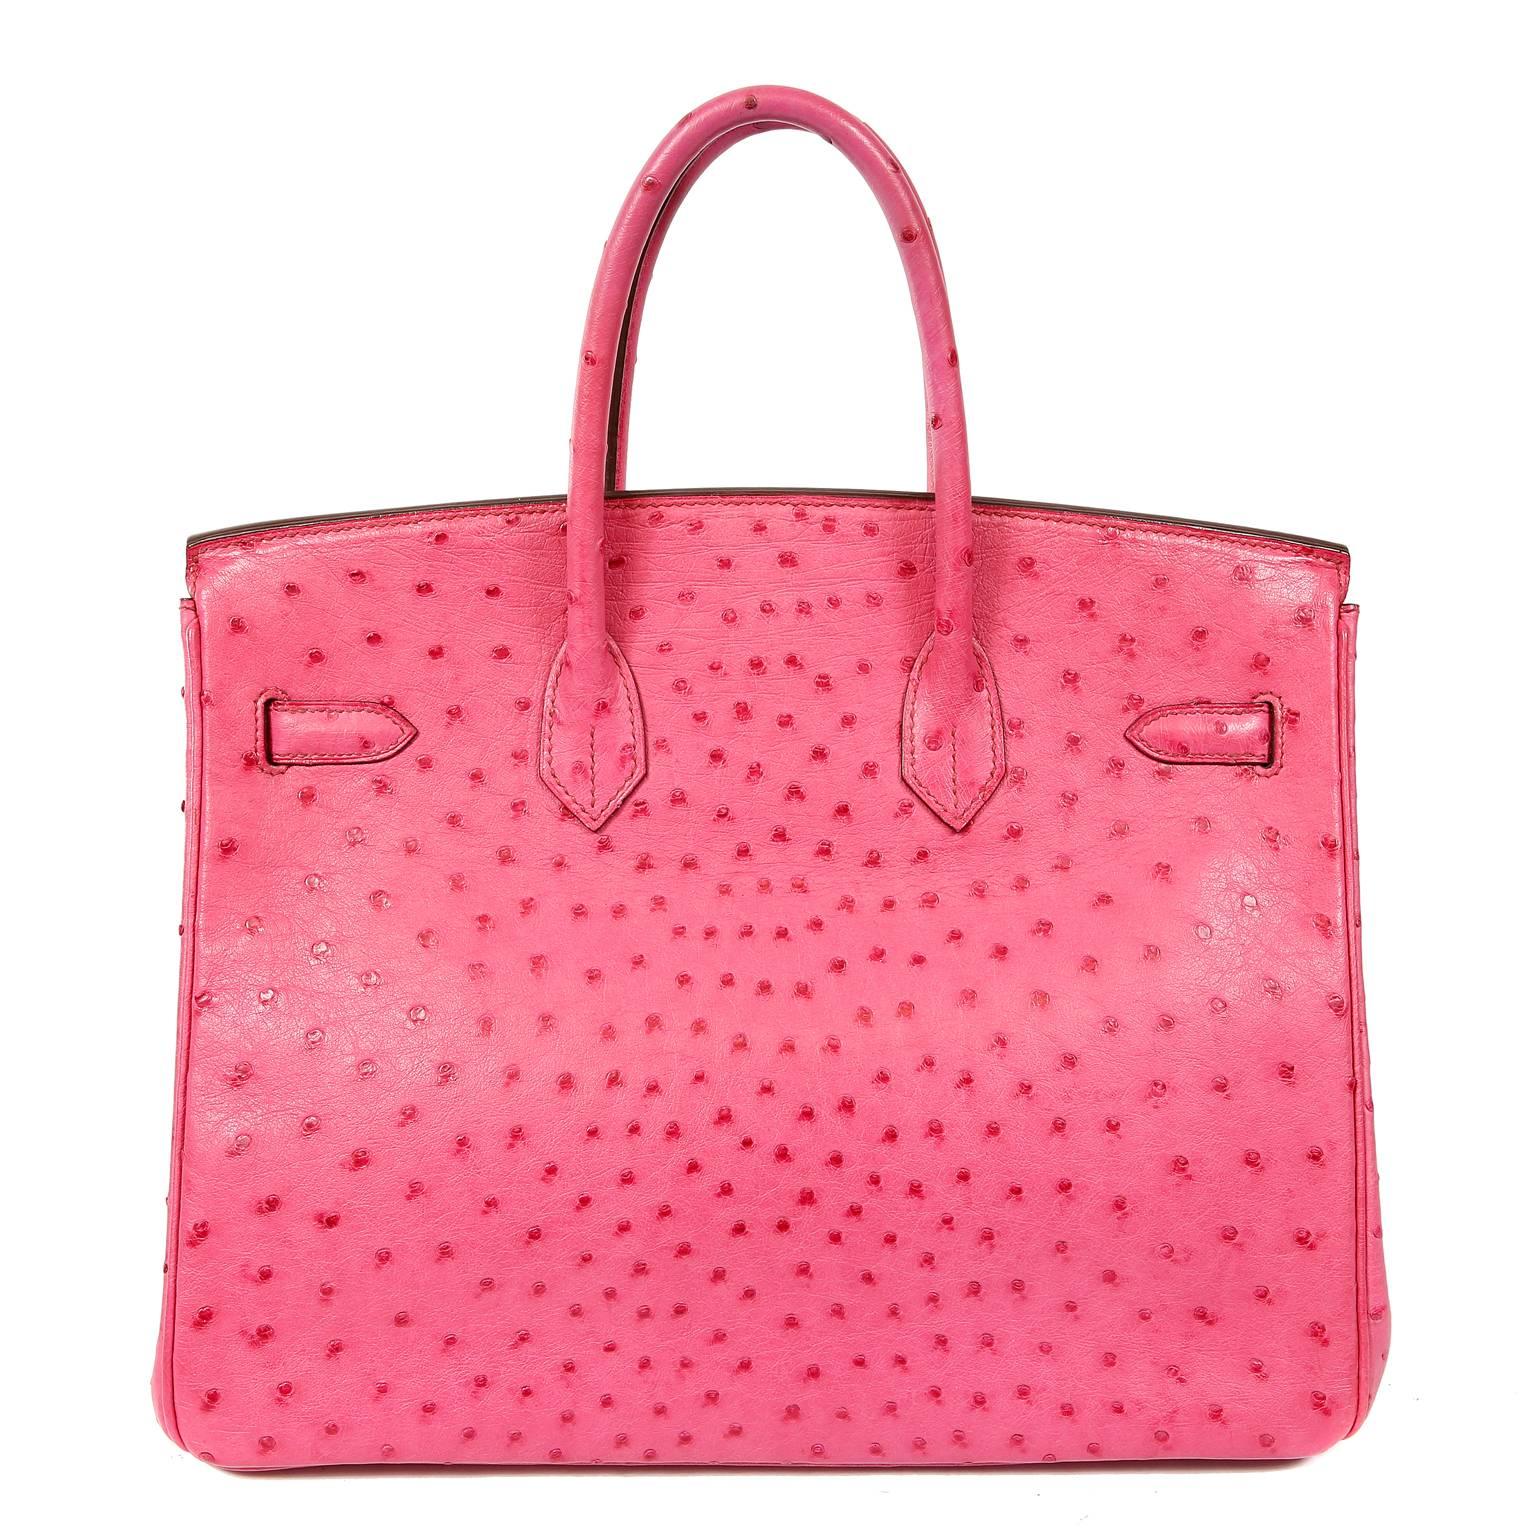 Hermès Pink Ostrich 35 cm Birkin Bag- MINT
 The ultimate luxury item the world over, Hermès Birkins are hand stitched by skilled craftsmen.  Wait lists of a year or more are commonplace for the bovine versions.  This particular Birkin is in Pink